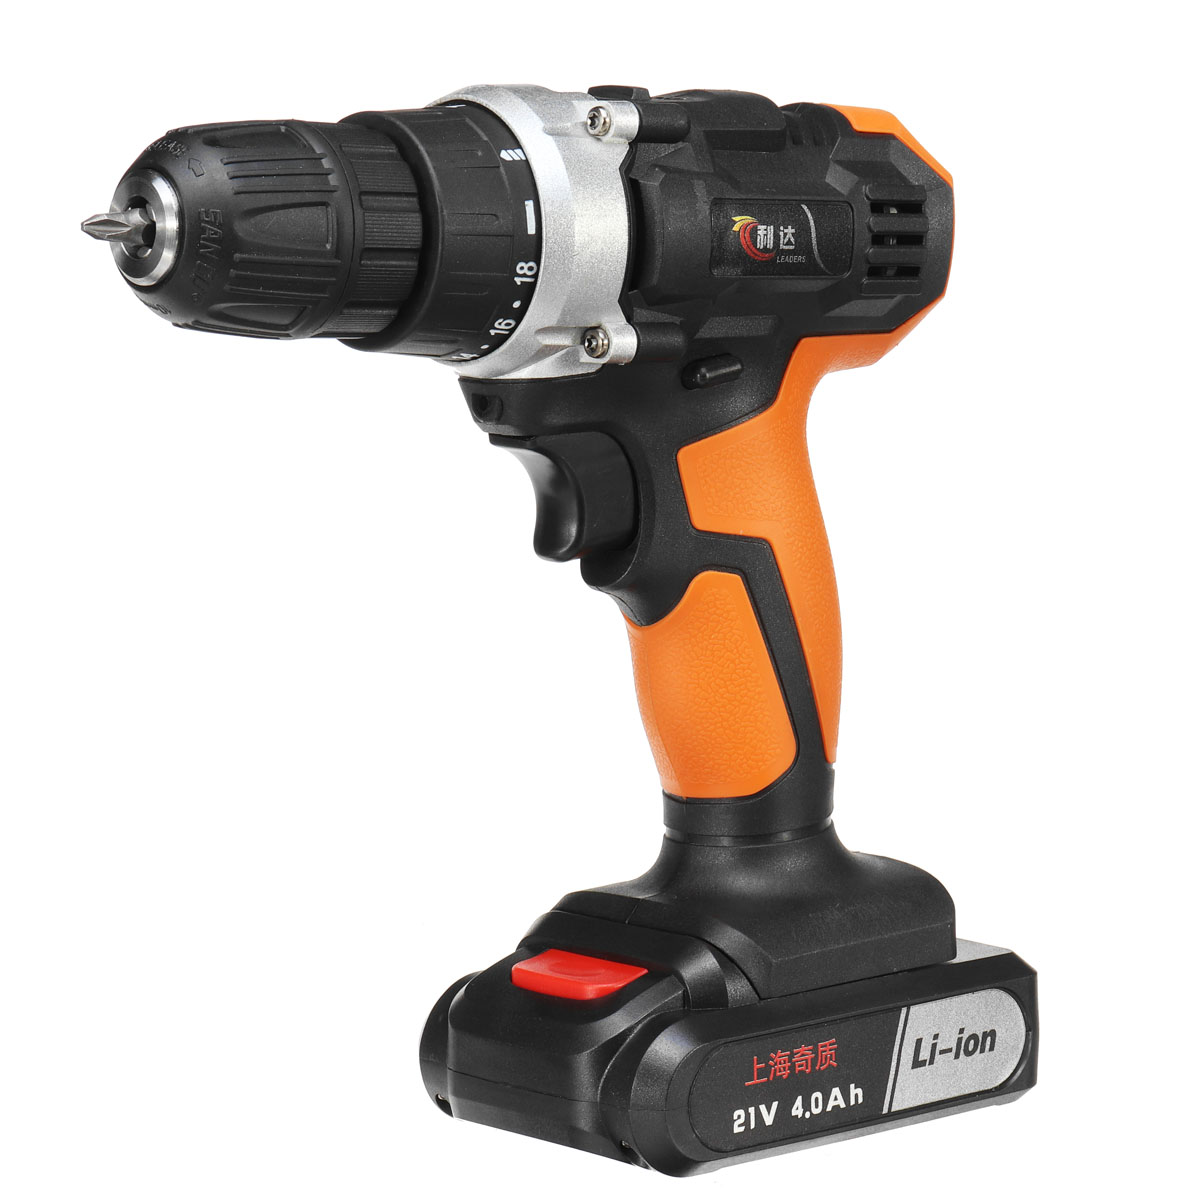 21V-4000mAh-Cordless-Rechargeable-Power-Drills-181-Electric-Screw-Driver-with-2-Li-ion-Batteries-1397476